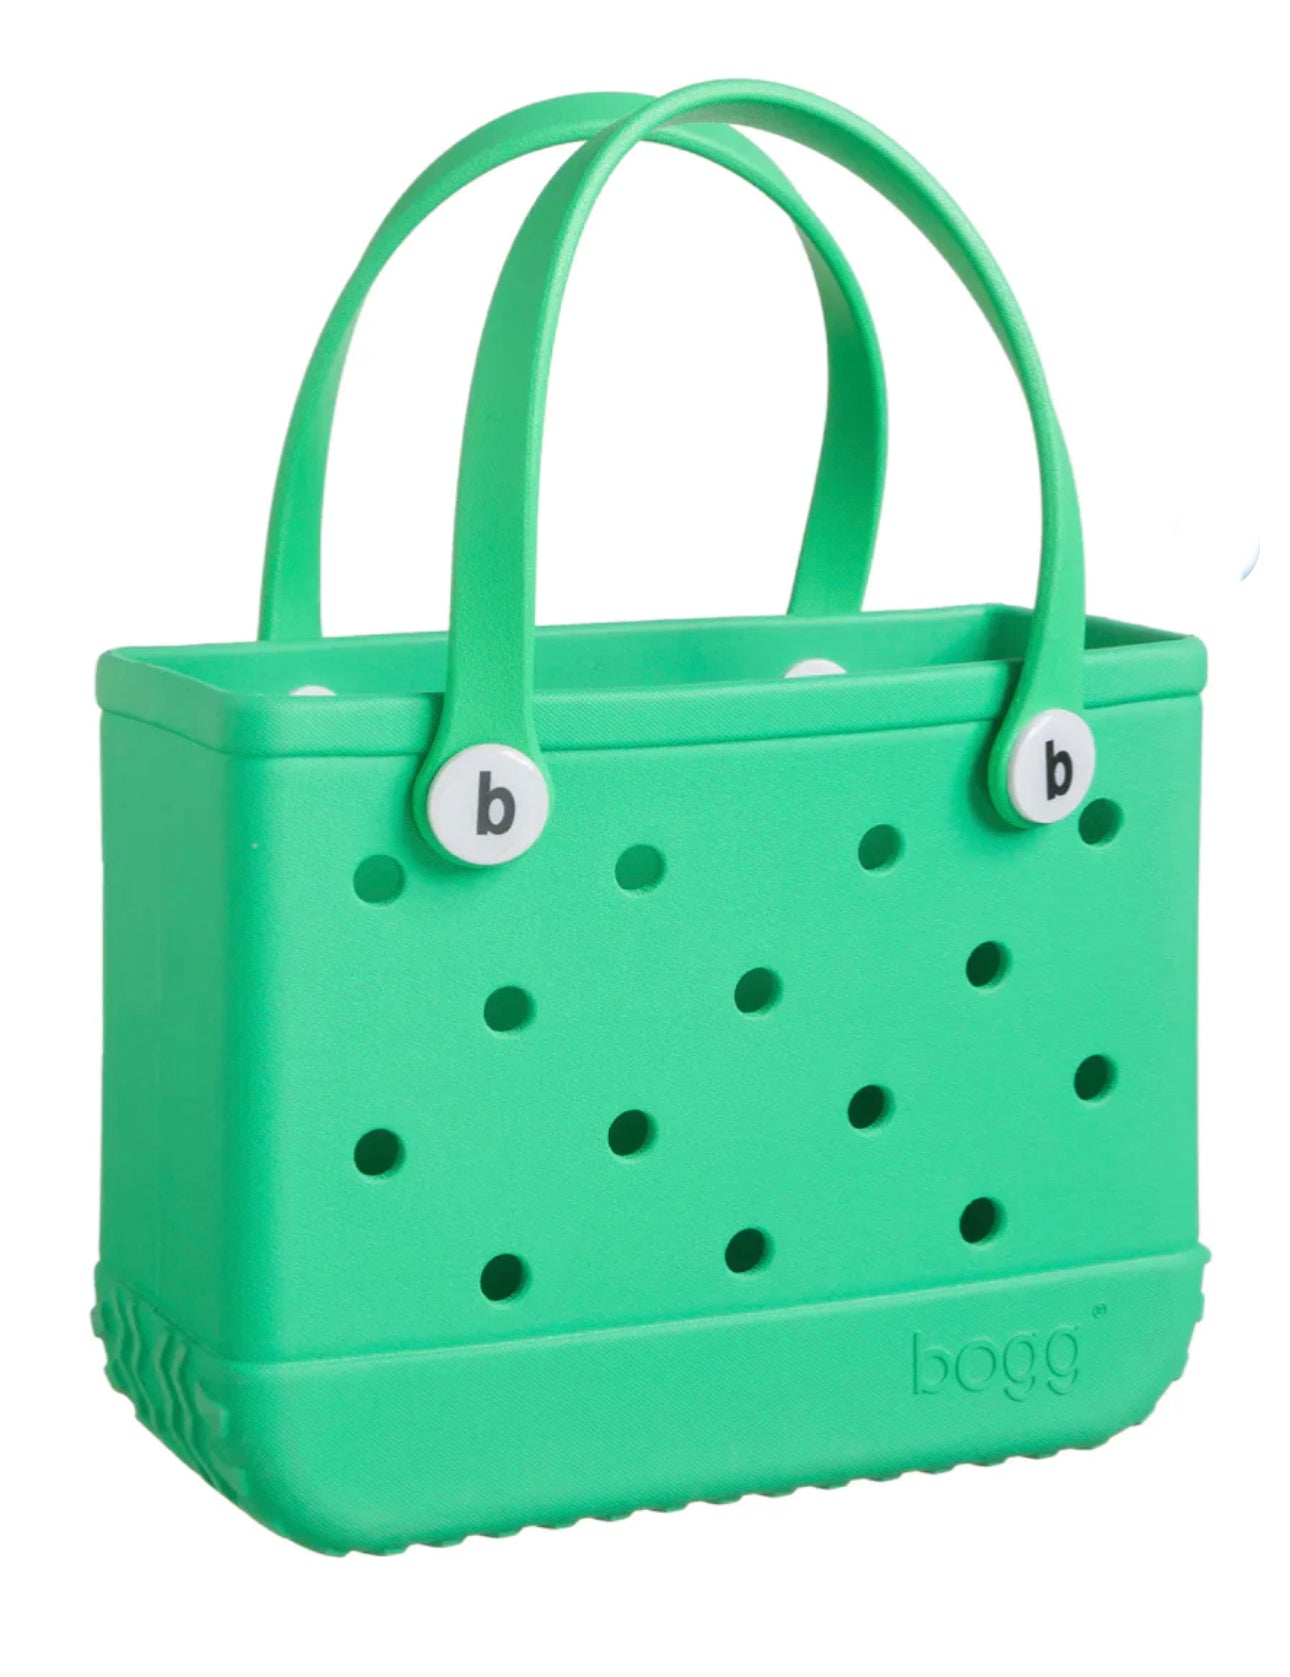 Baby Bogg Bag Solid Variety of Colors – The Bugs Ear